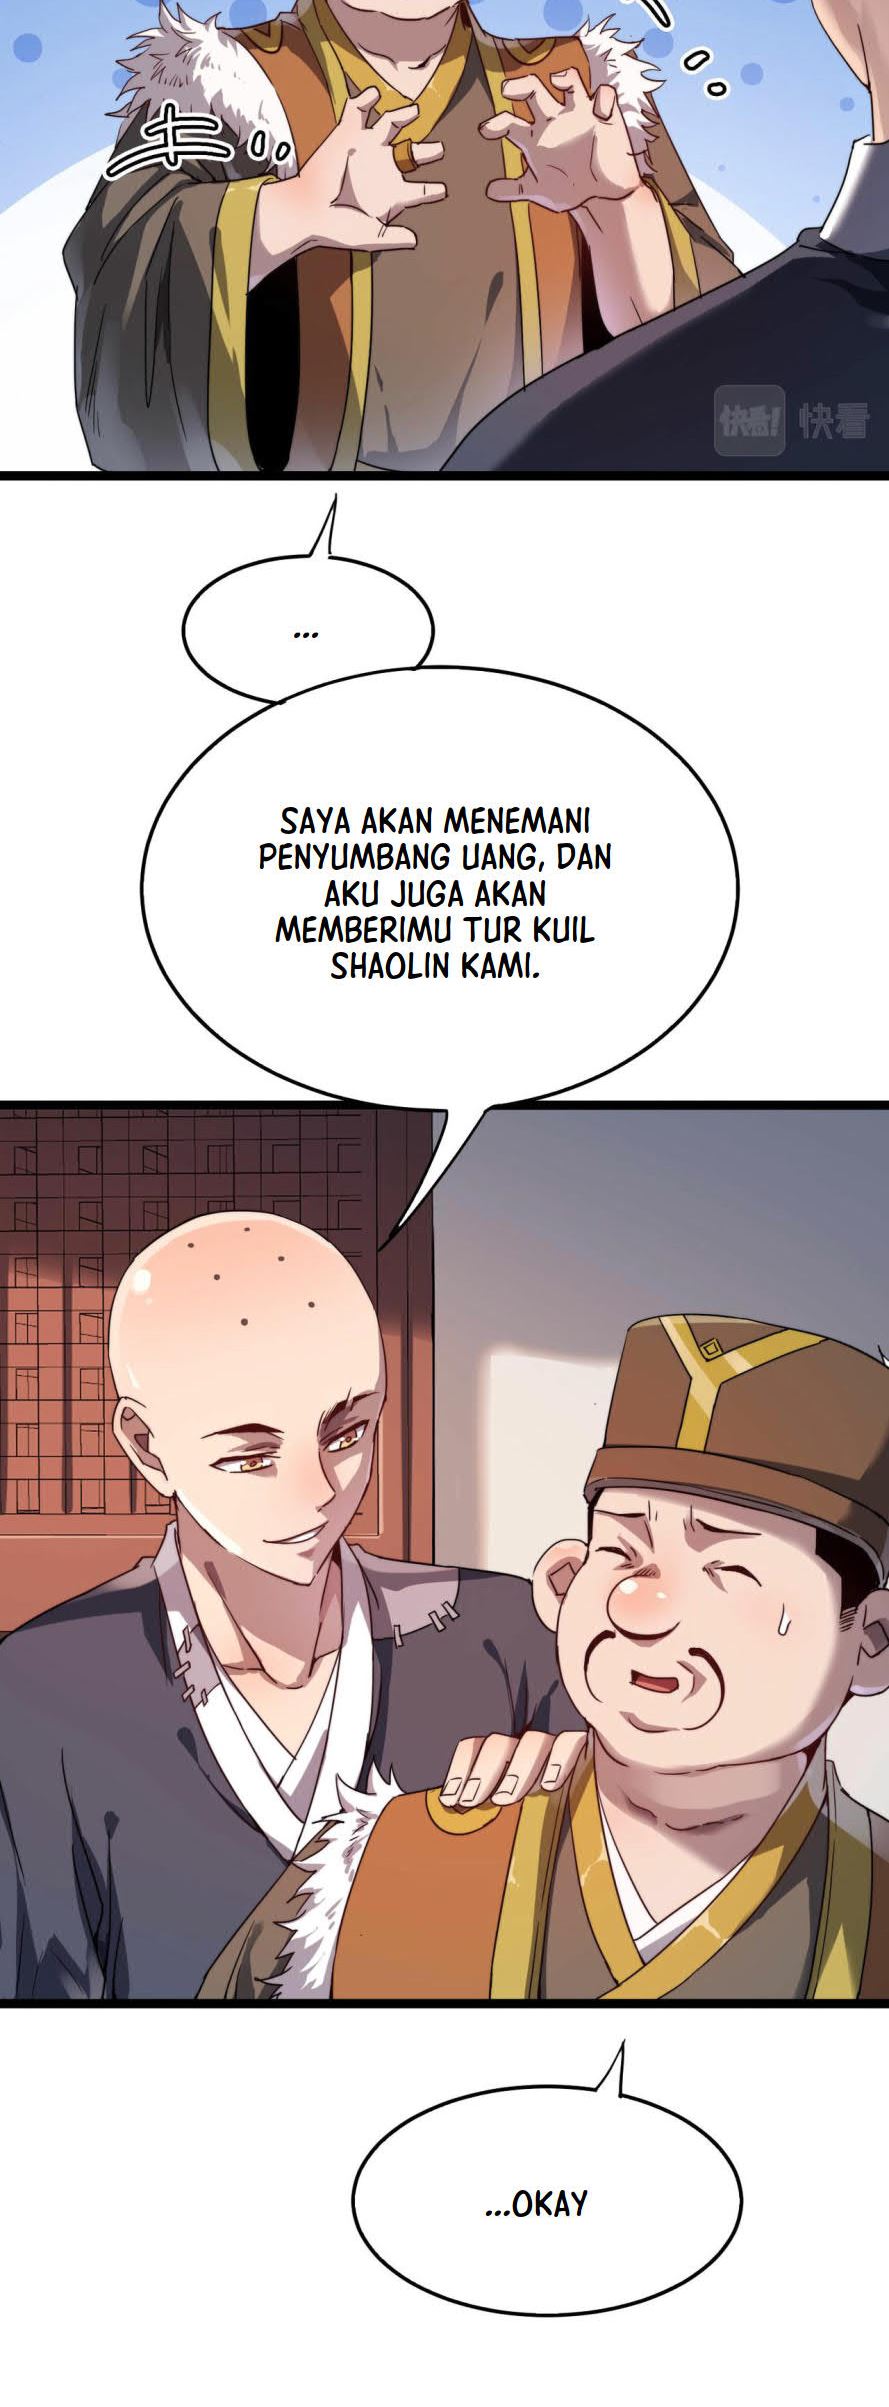 Dilarang COPAS - situs resmi www.mangacanblog.com - Komik building the strongest shaolin temple in another world 007 - chapter 7 8 Indonesia building the strongest shaolin temple in another world 007 - chapter 7 Terbaru 5|Baca Manga Komik Indonesia|Mangacan